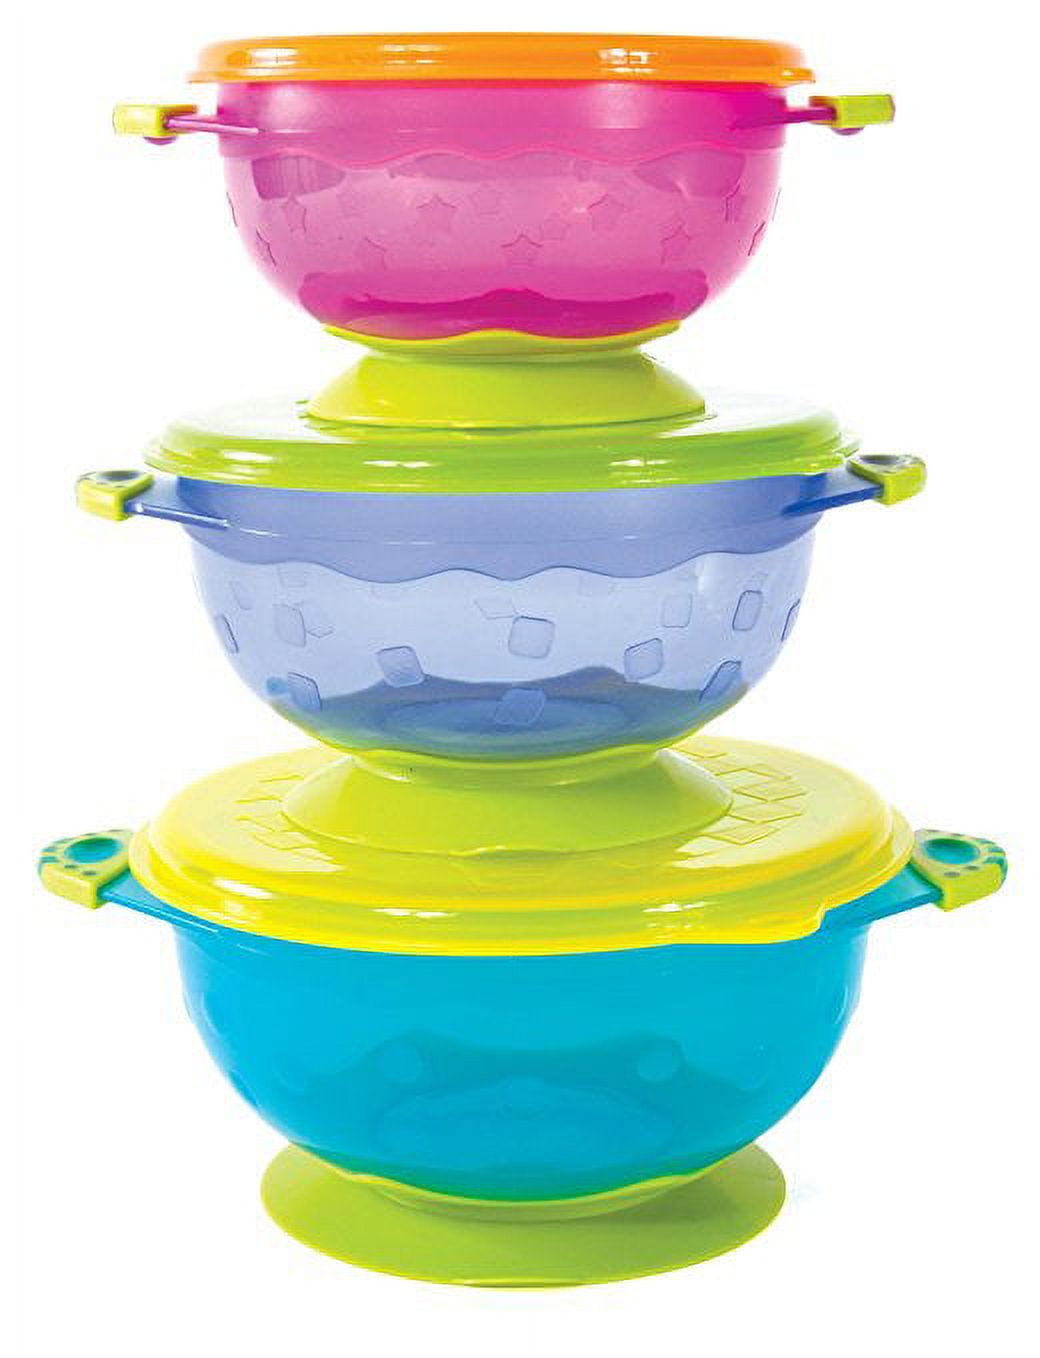  Potchen 4 Set Silicone Baby Bowls with Lid Spoon and Fork  Suction Bowls for Baby Toddler Self-feeding Baby Food Bowl First Stage  Dishwasher and Microwave Safe, 4 Colors : Baby